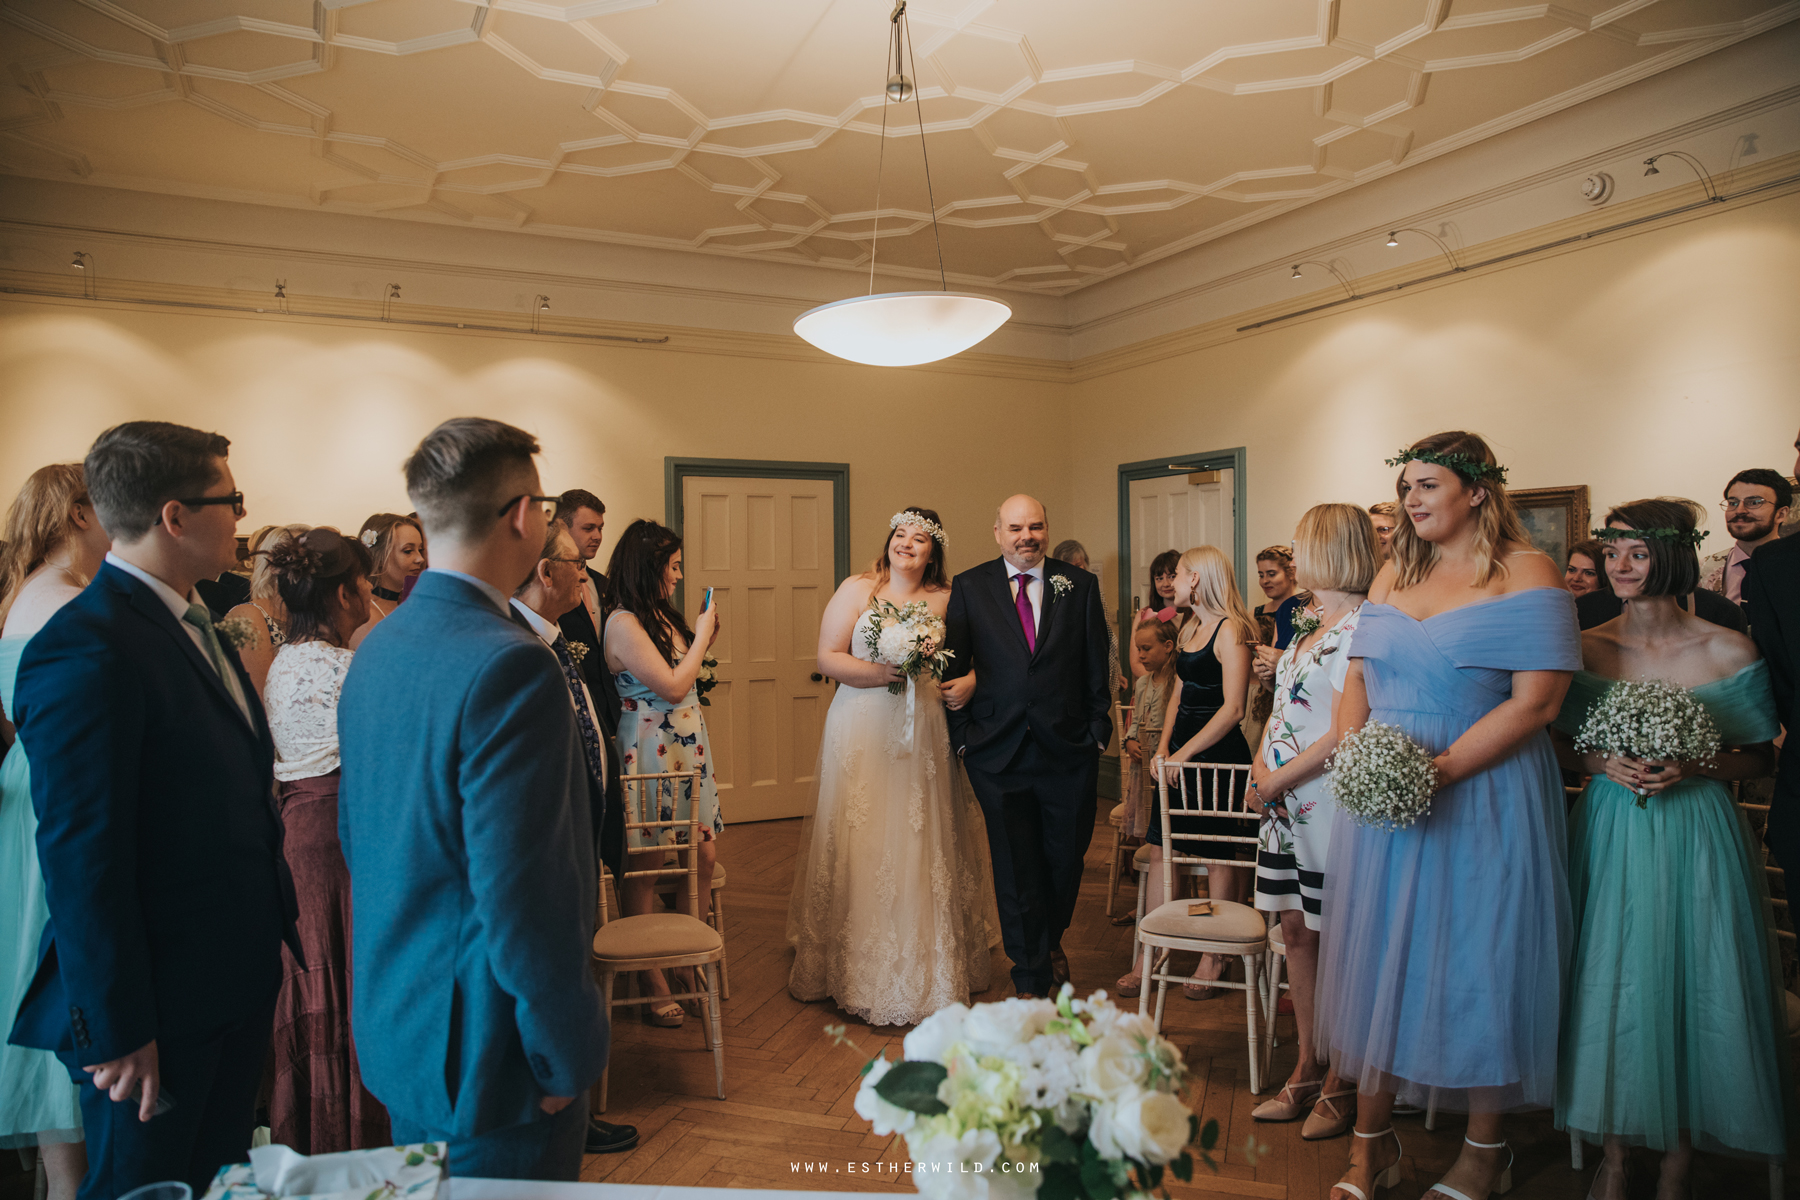 Norwich_Castle_Arcade_Grosvenor_Chip_Birdcage_Cathedral_Cloisters_Refectory_Wedding_Photography_Esther_Wild_Photographer_Norfolk_Kings_Lynn_3R8A0871.jpg